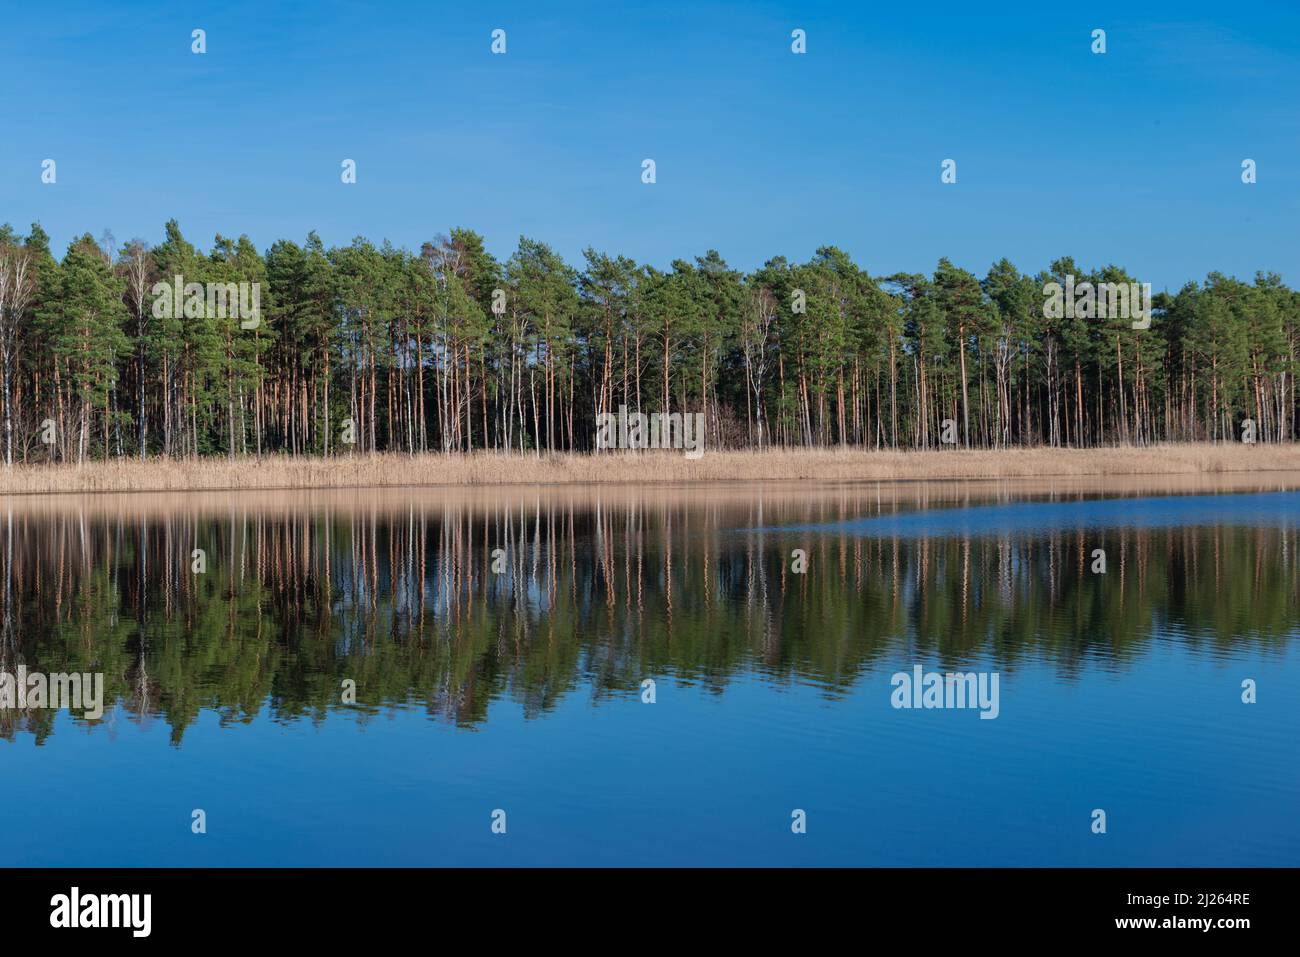 The lake is situated in a tall pine forest. The shores are covered with dry yellow grass. The sky is clear. Stock Photo